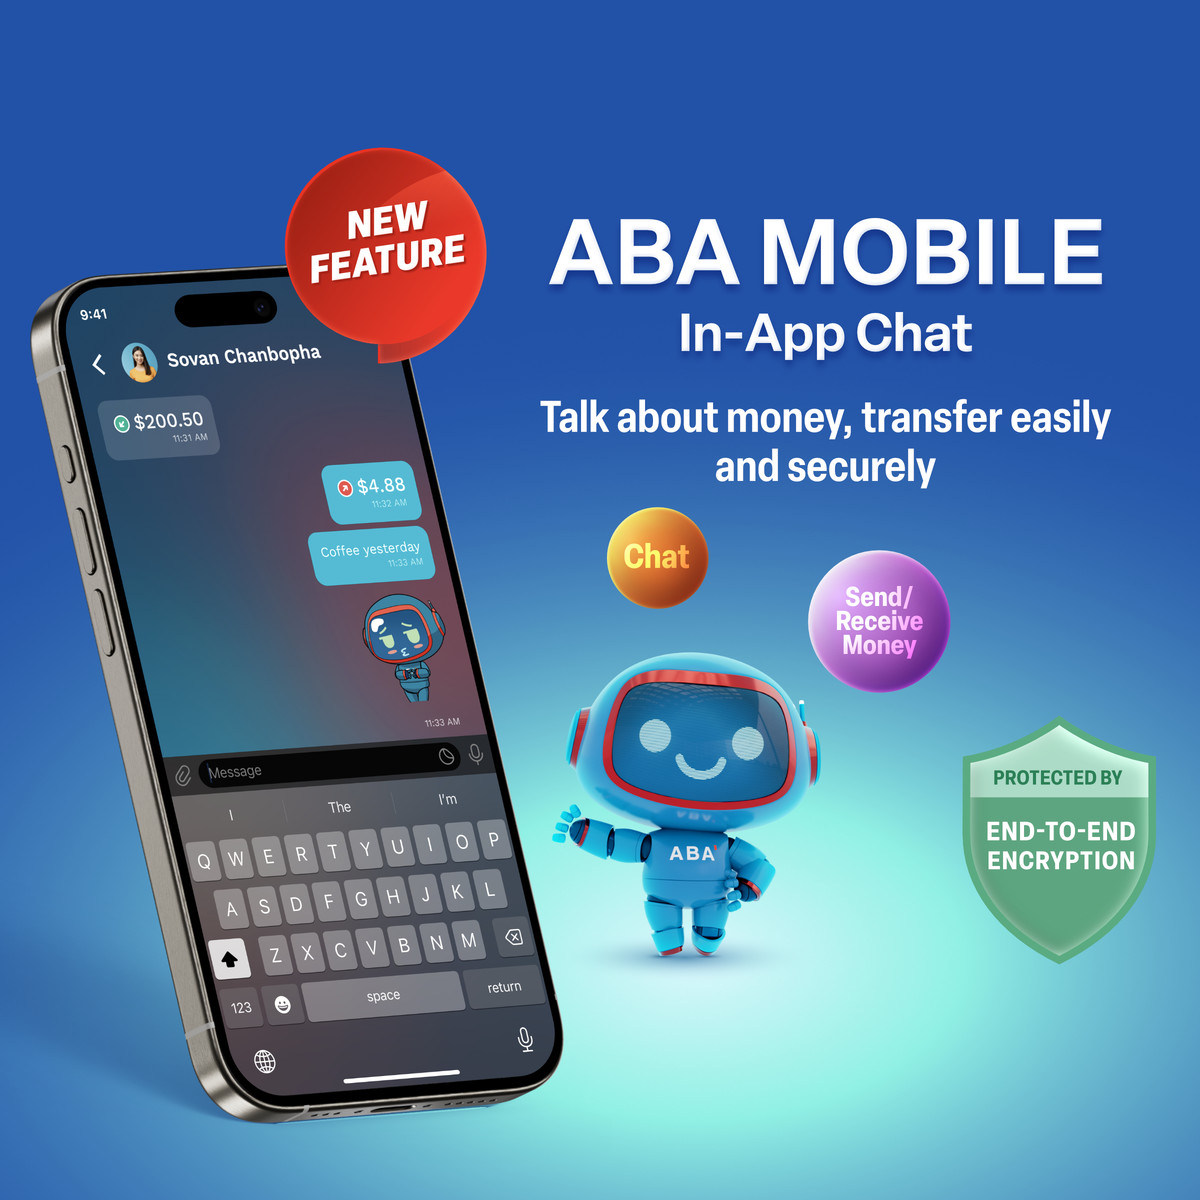 Introducing revolutionary ABA Mobile In-App Chat for secure money conversations